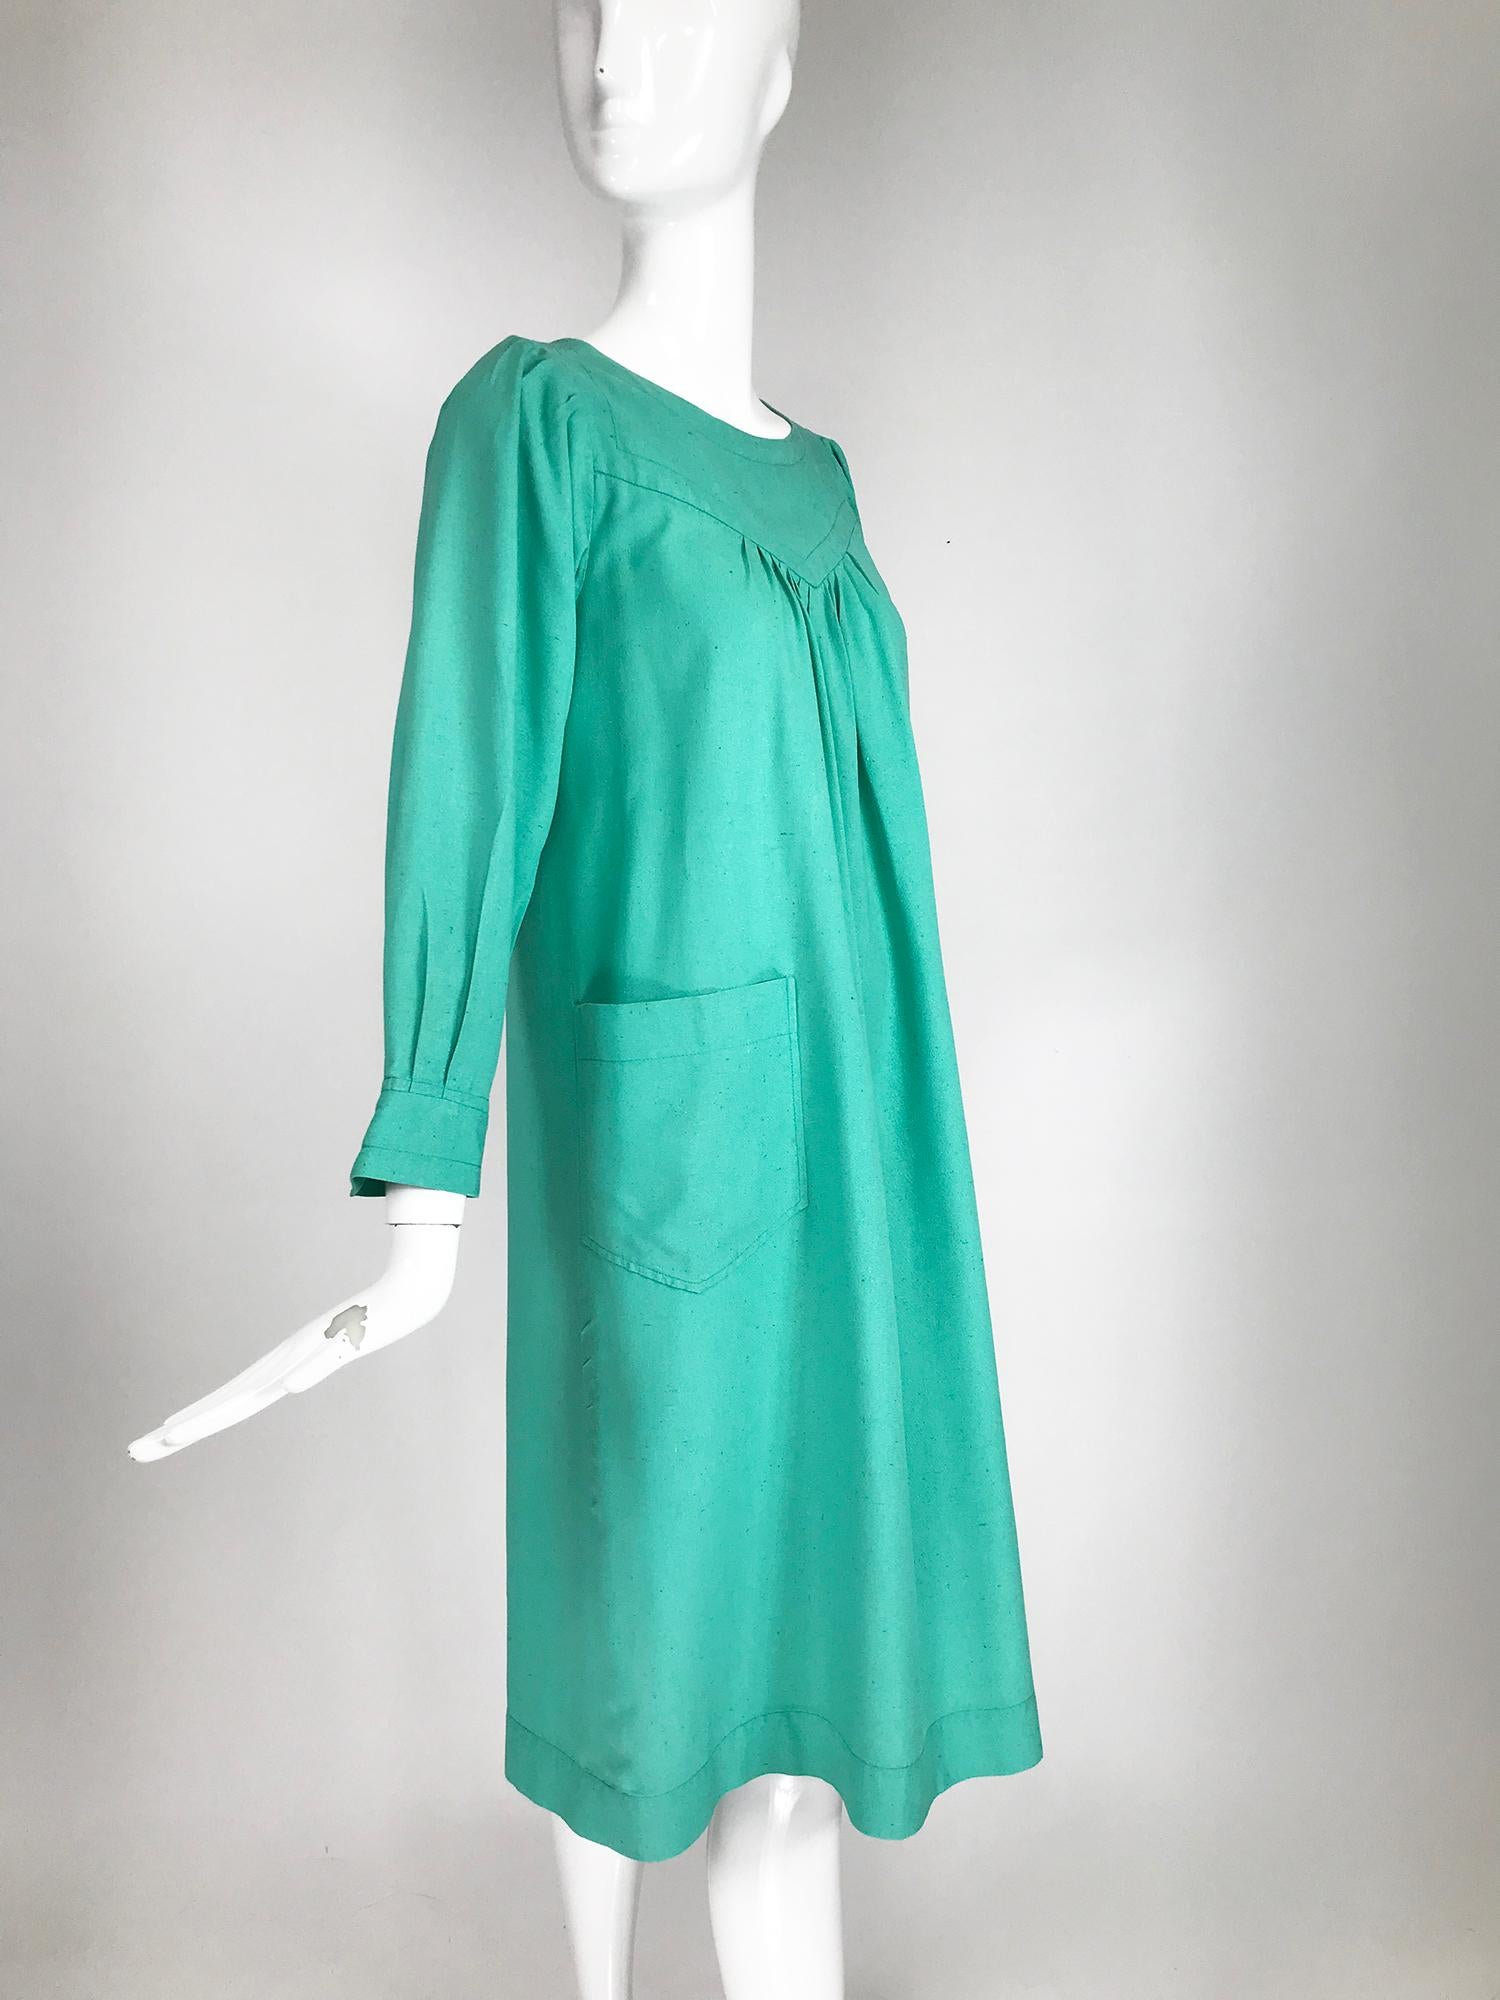 Yves Saint Laurent Rive Gauche aqua slub silk smock dress from the 1970s. Pull on dress has round neckline with a yoke front and back, the dress is gathered above the bust front and Back. Long full sleeves have wide cuff that is open and can be